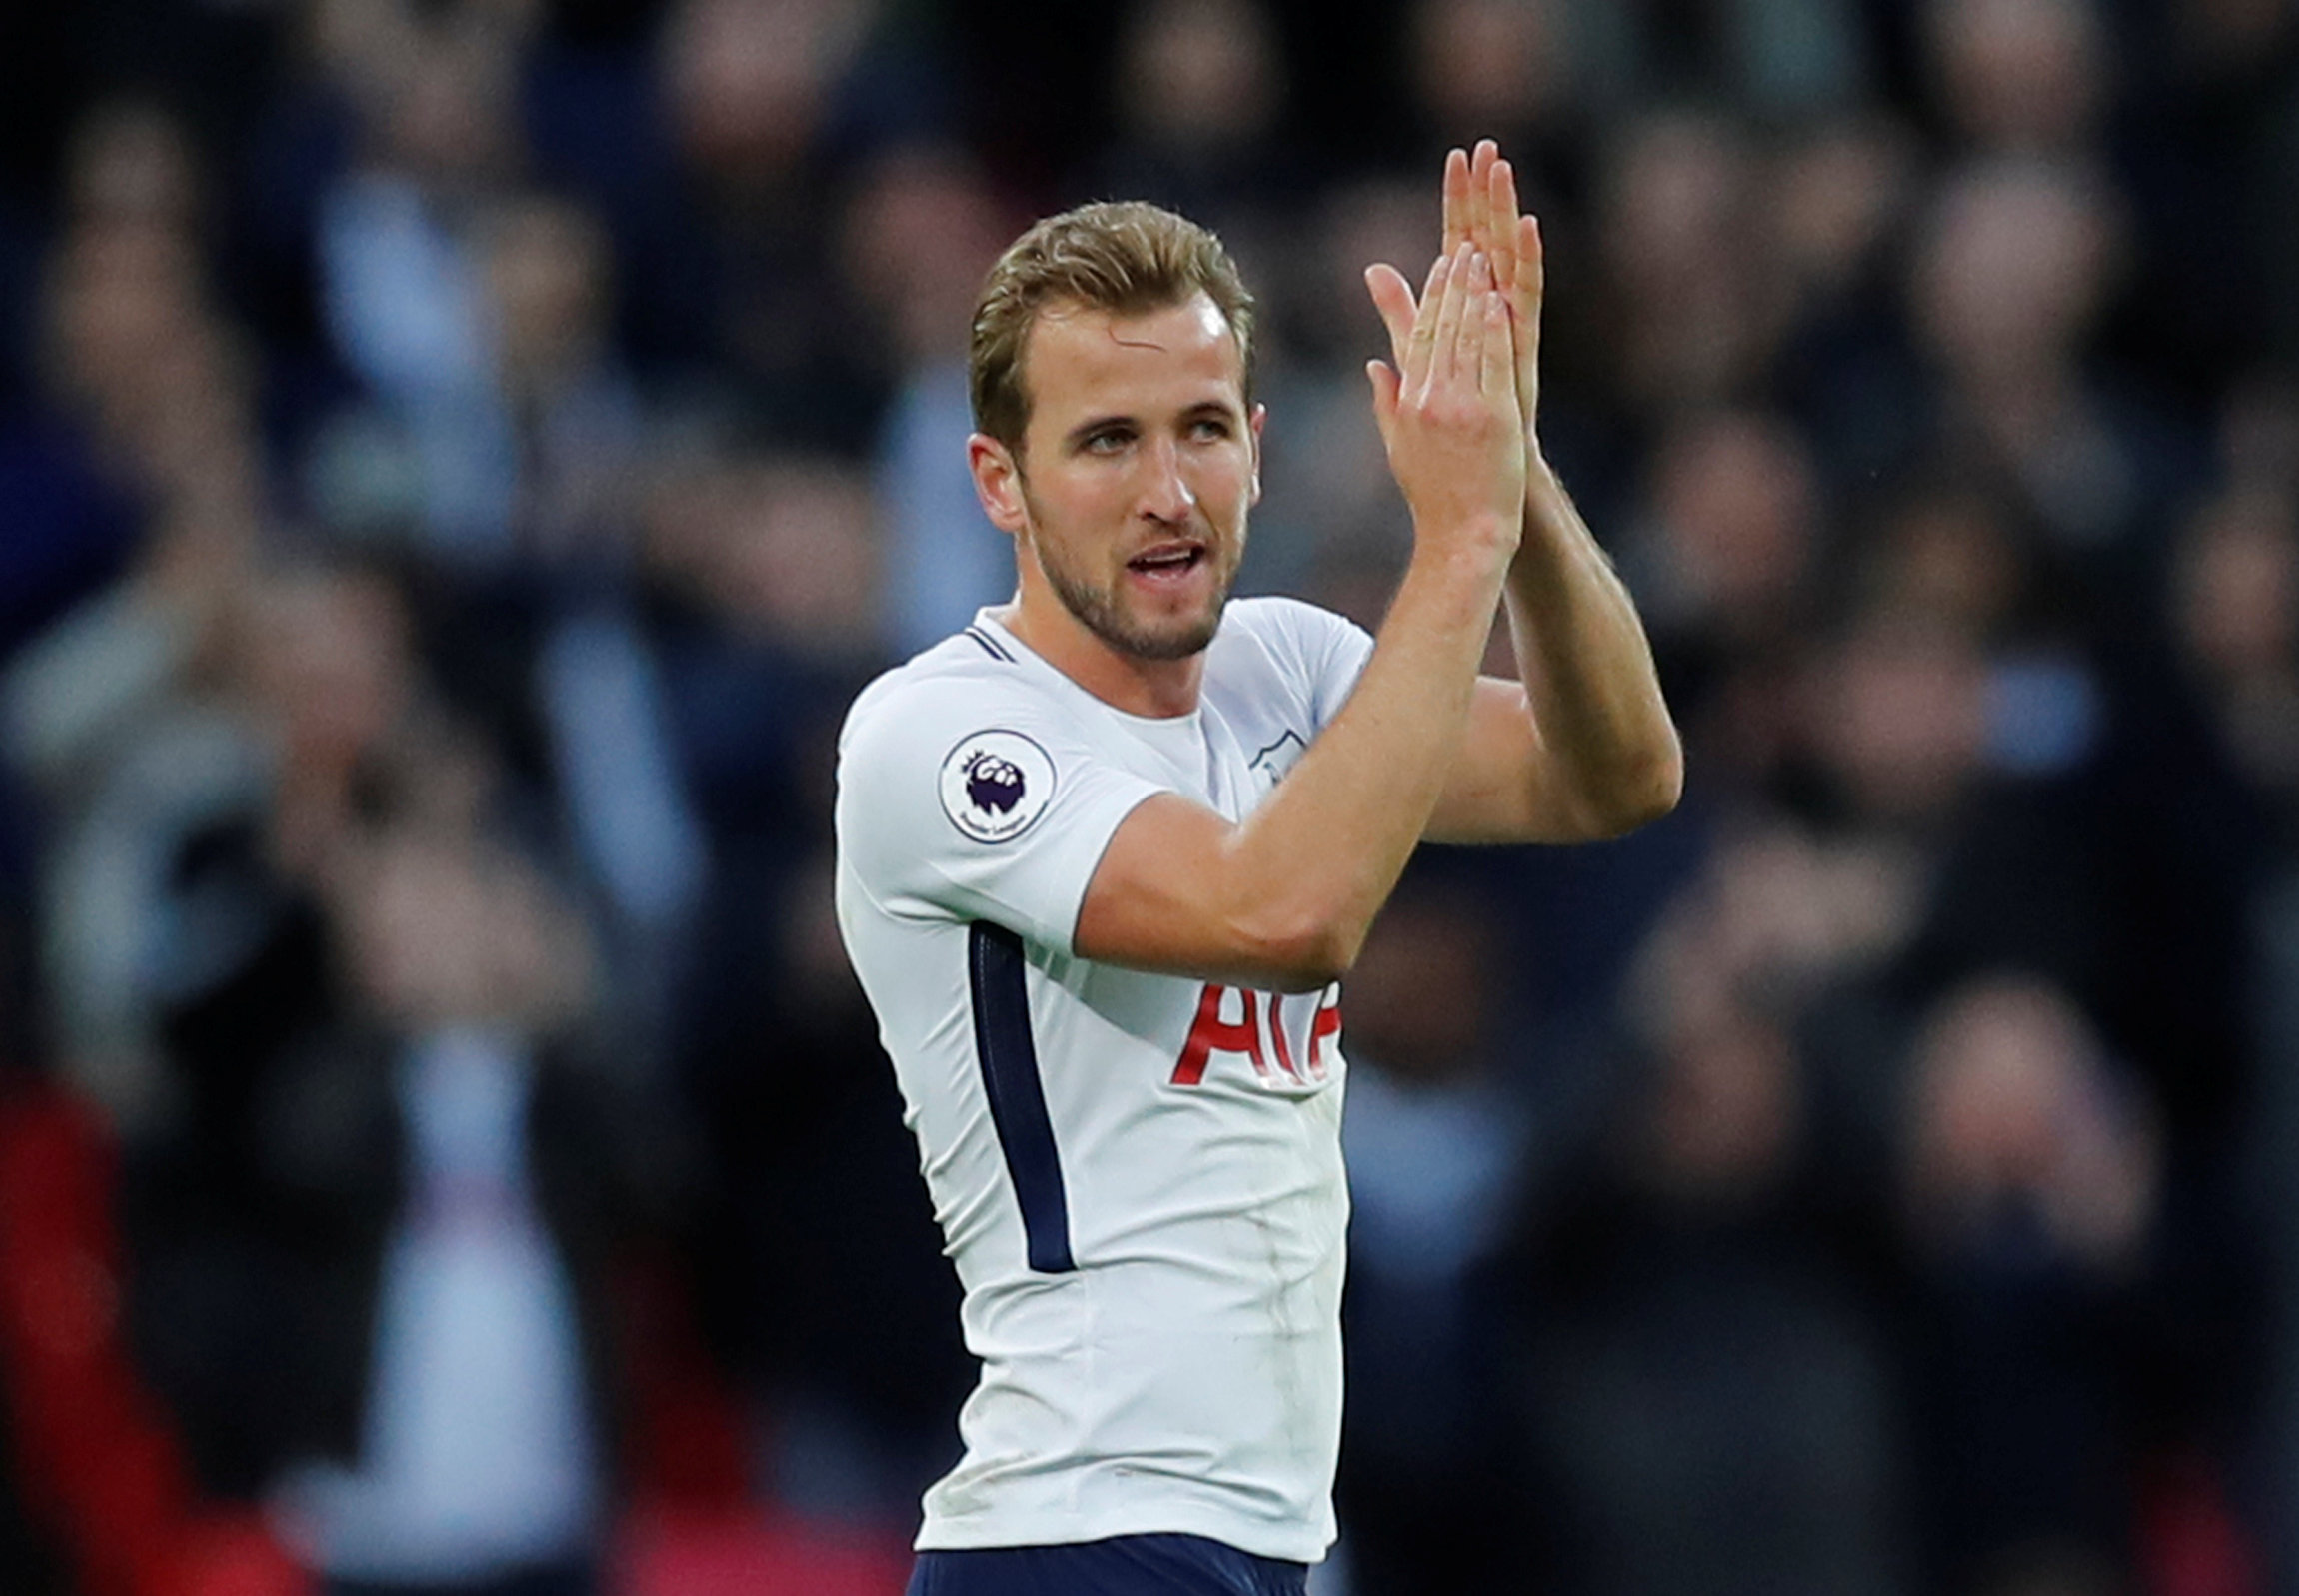 Football: Spurs' Kane spurred on by Zidane's praise